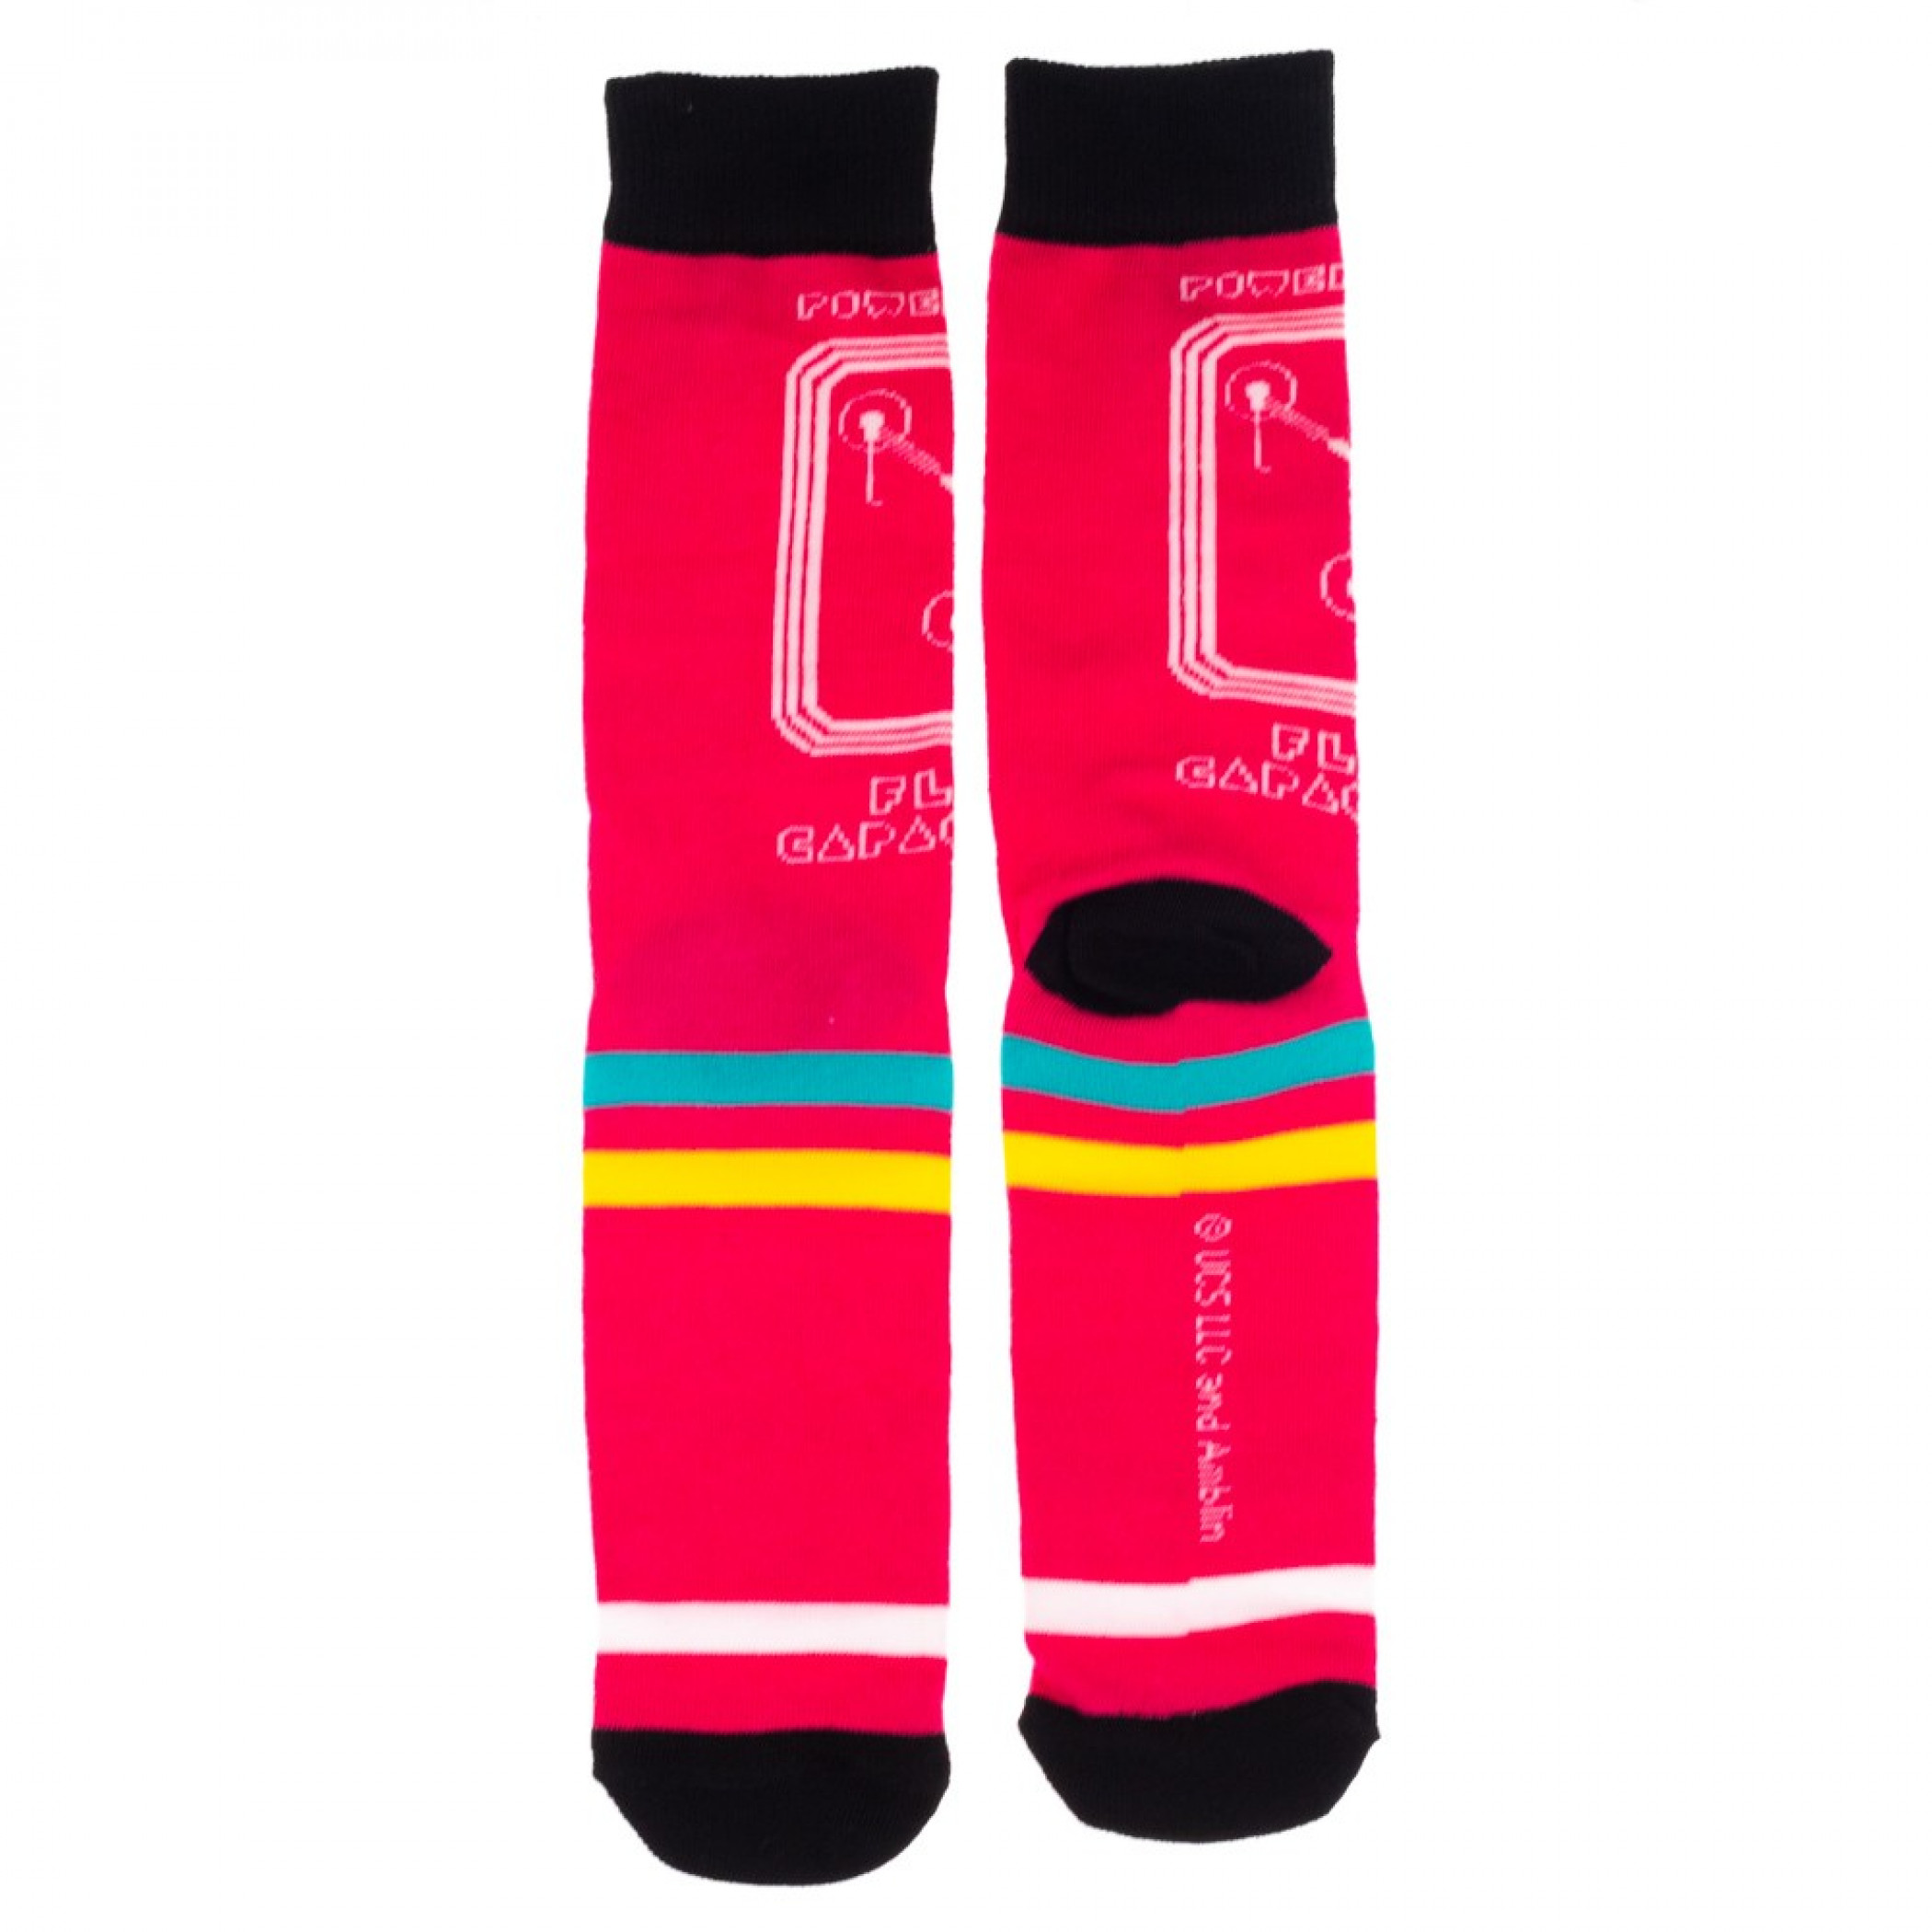 Back to the Future 3-Pair Pack of Crew Socks